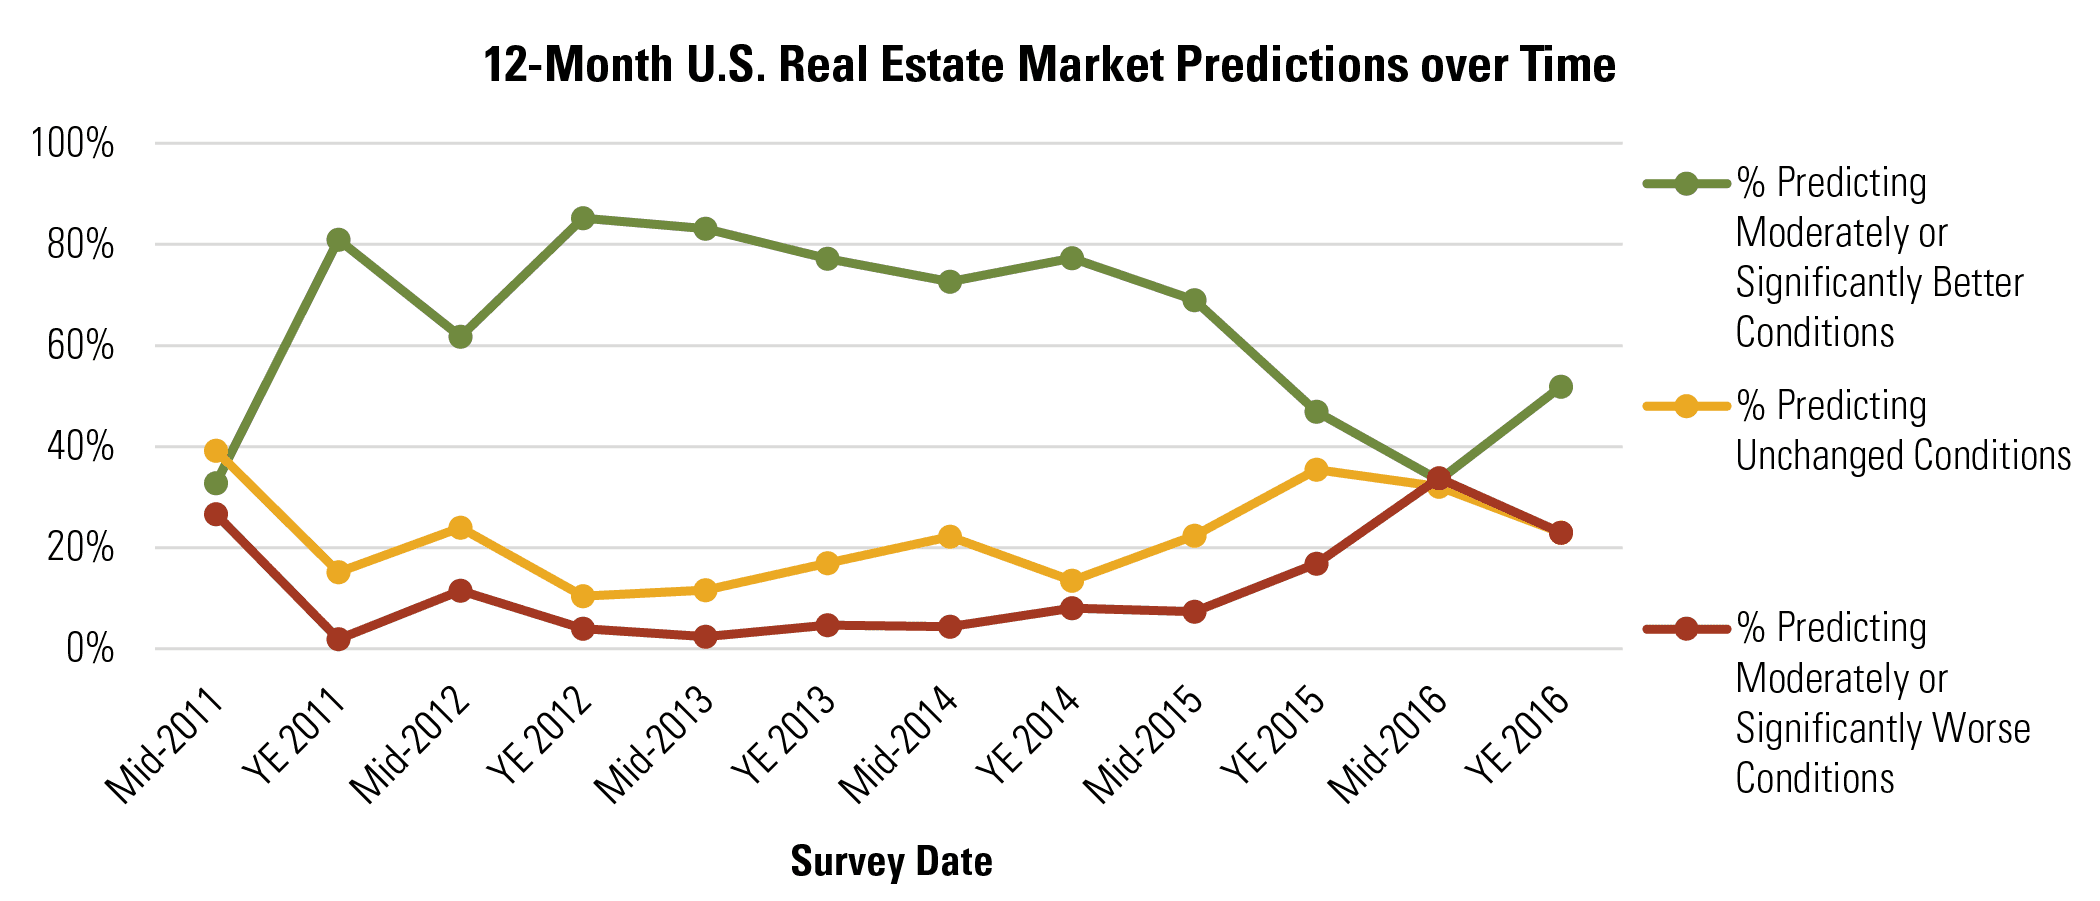 12-Month U.S. Real Estate Market Predictions over Time